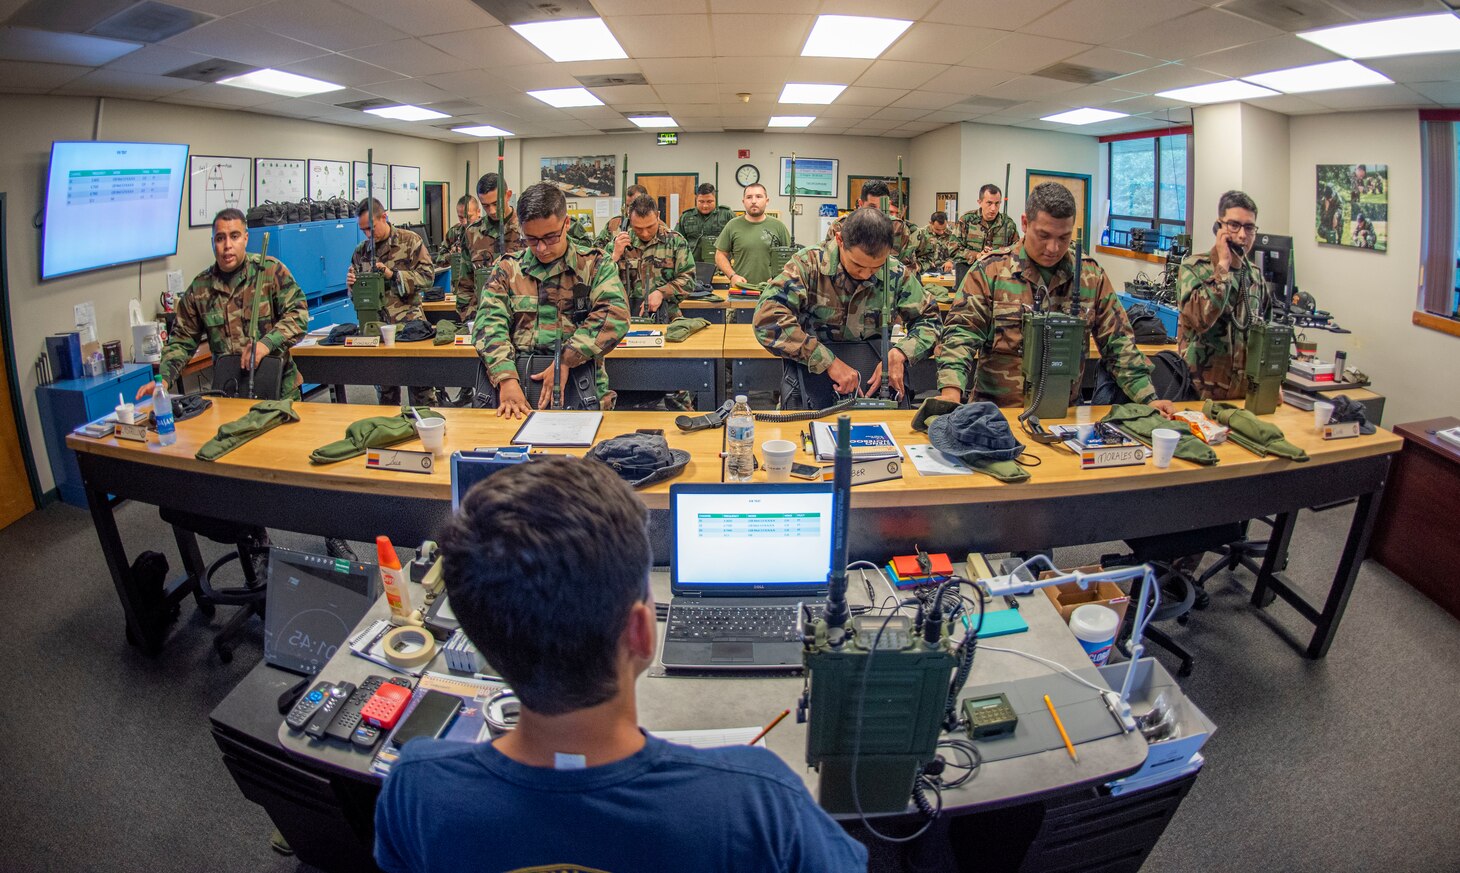 International students conduct a training evolution as part of the Waterborne Instructor Course Riverine at Naval Small Craft Instruction and Technical Training School (NAVSCIATTS).